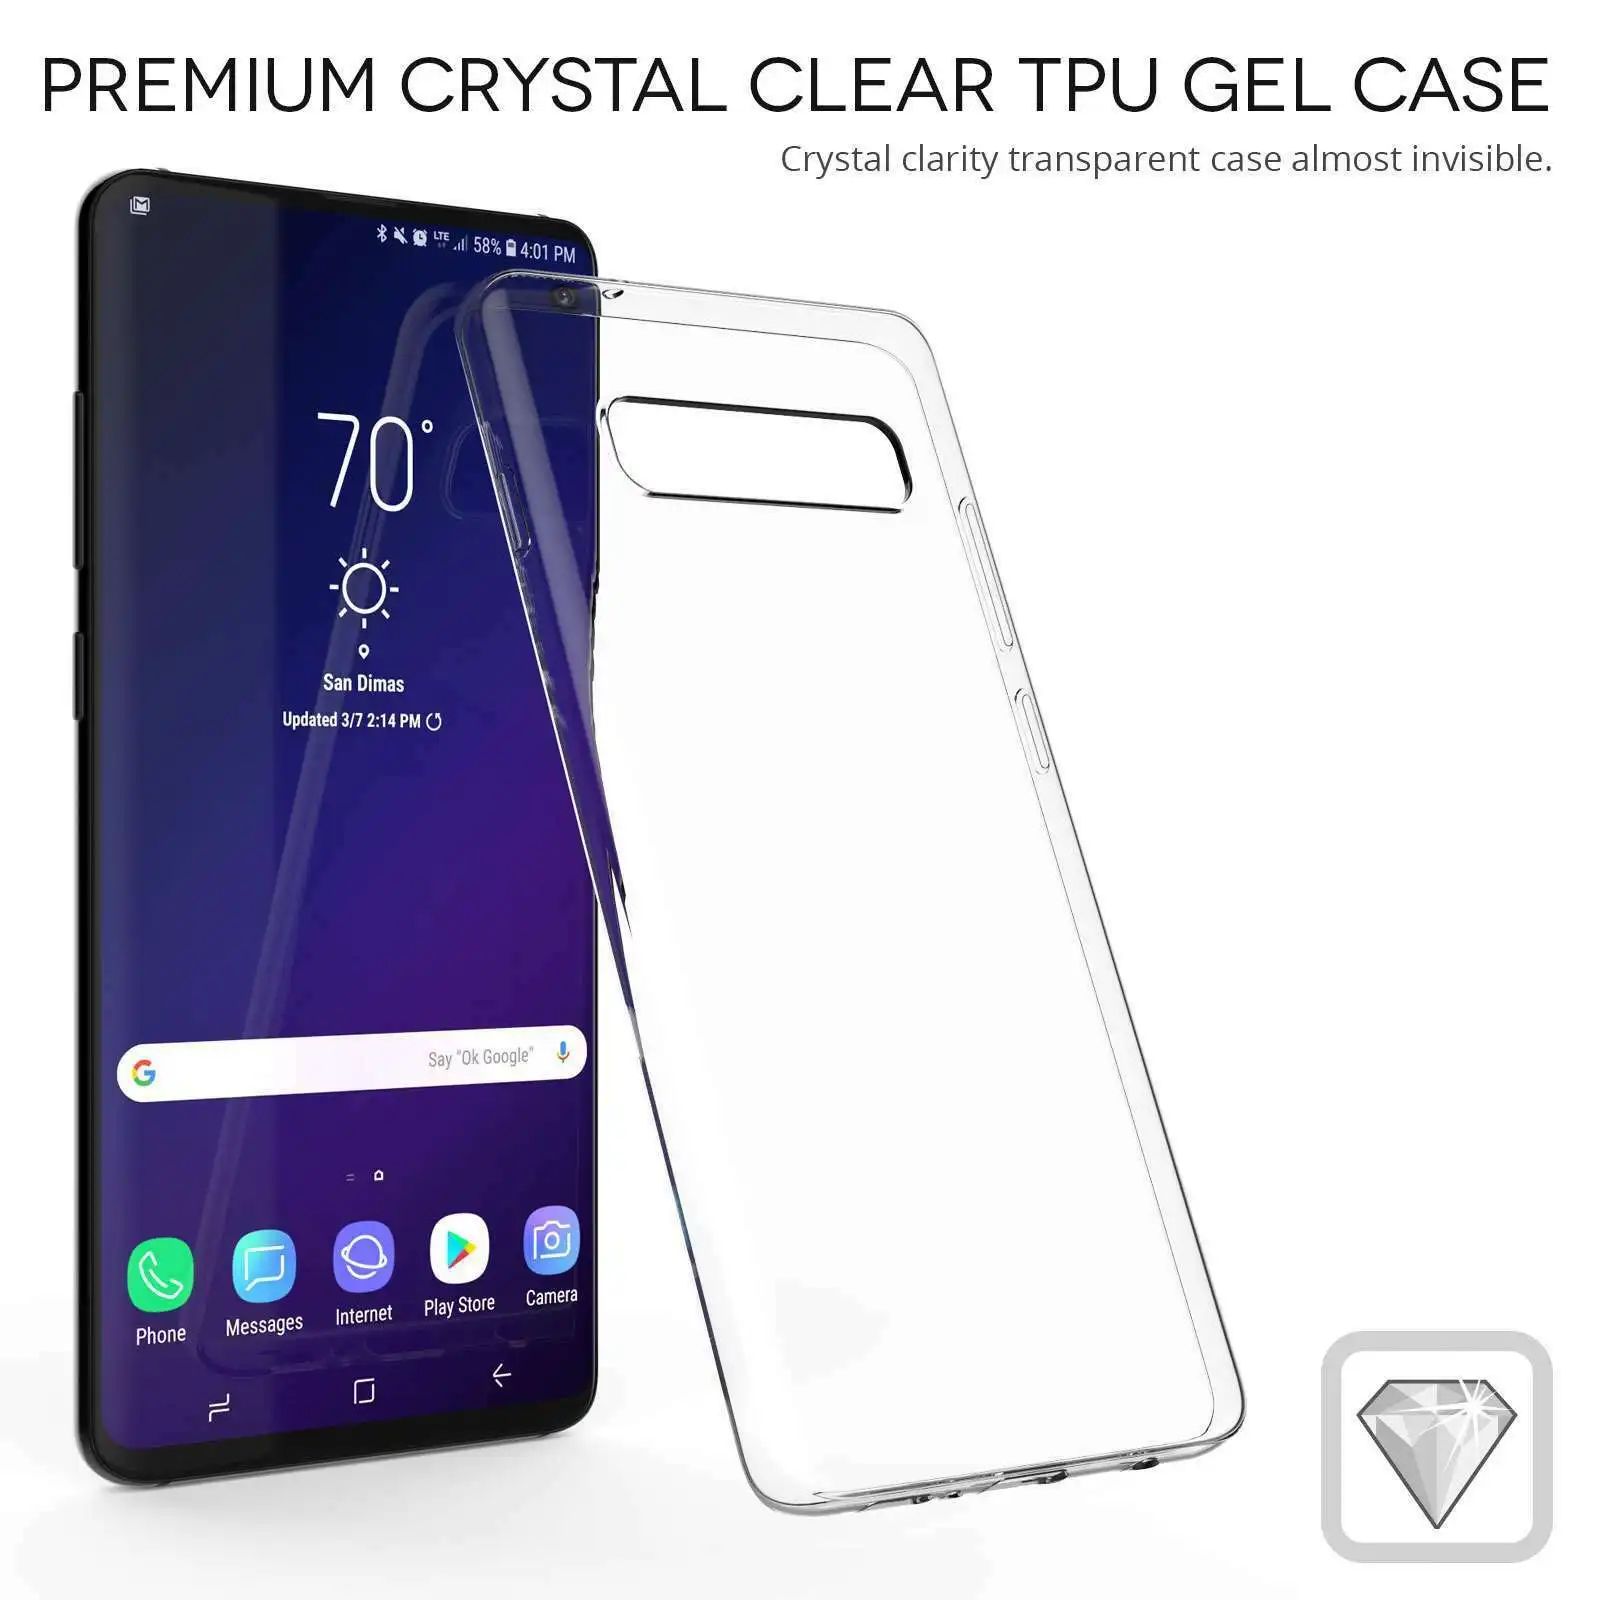 

Luxury Silicone Clear Back Ultrathin Clear Cover Case for Samsung Galaxy S10 S10 Plus S10e